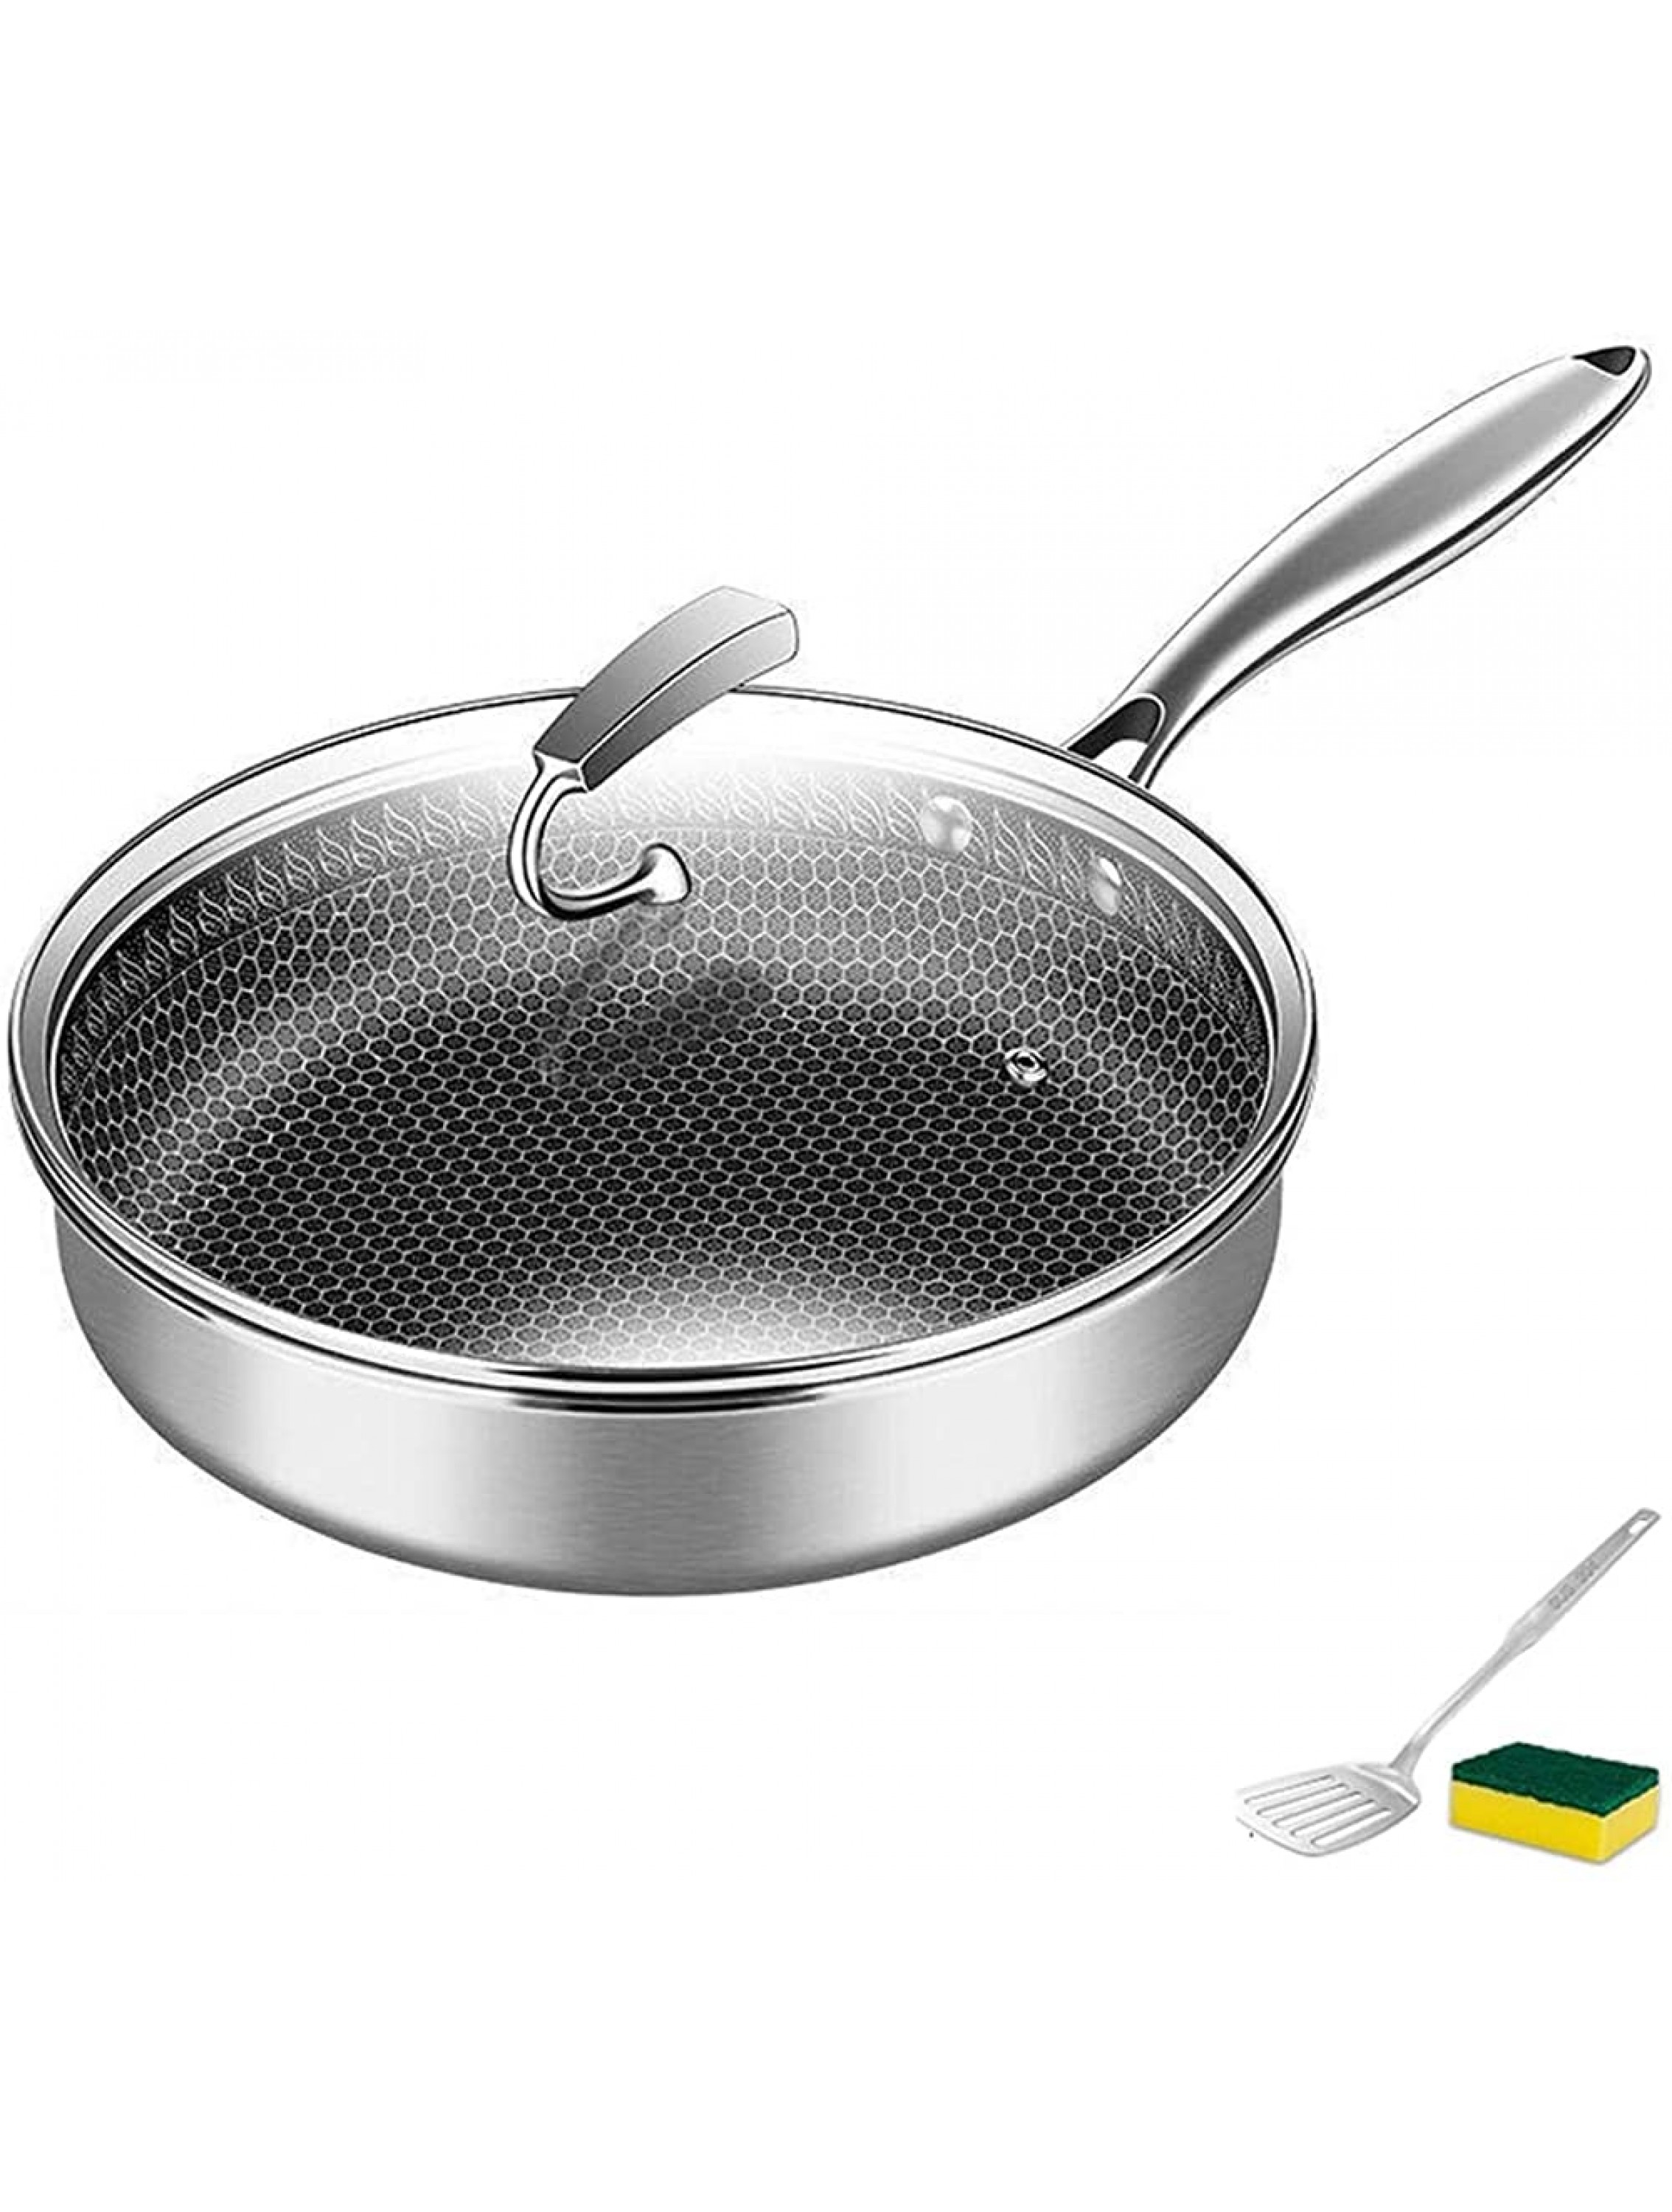 SHENGDAFASHANGCHENG Nonstick Skillet,Deep Frying Pan with Glass Lid,Cooking Pan with Soft Bakelite Handle Saute Pan Chef's pan Omelette Pans for All Stove Tops Stainless Steel Frying Pan - BWKSK9BIE